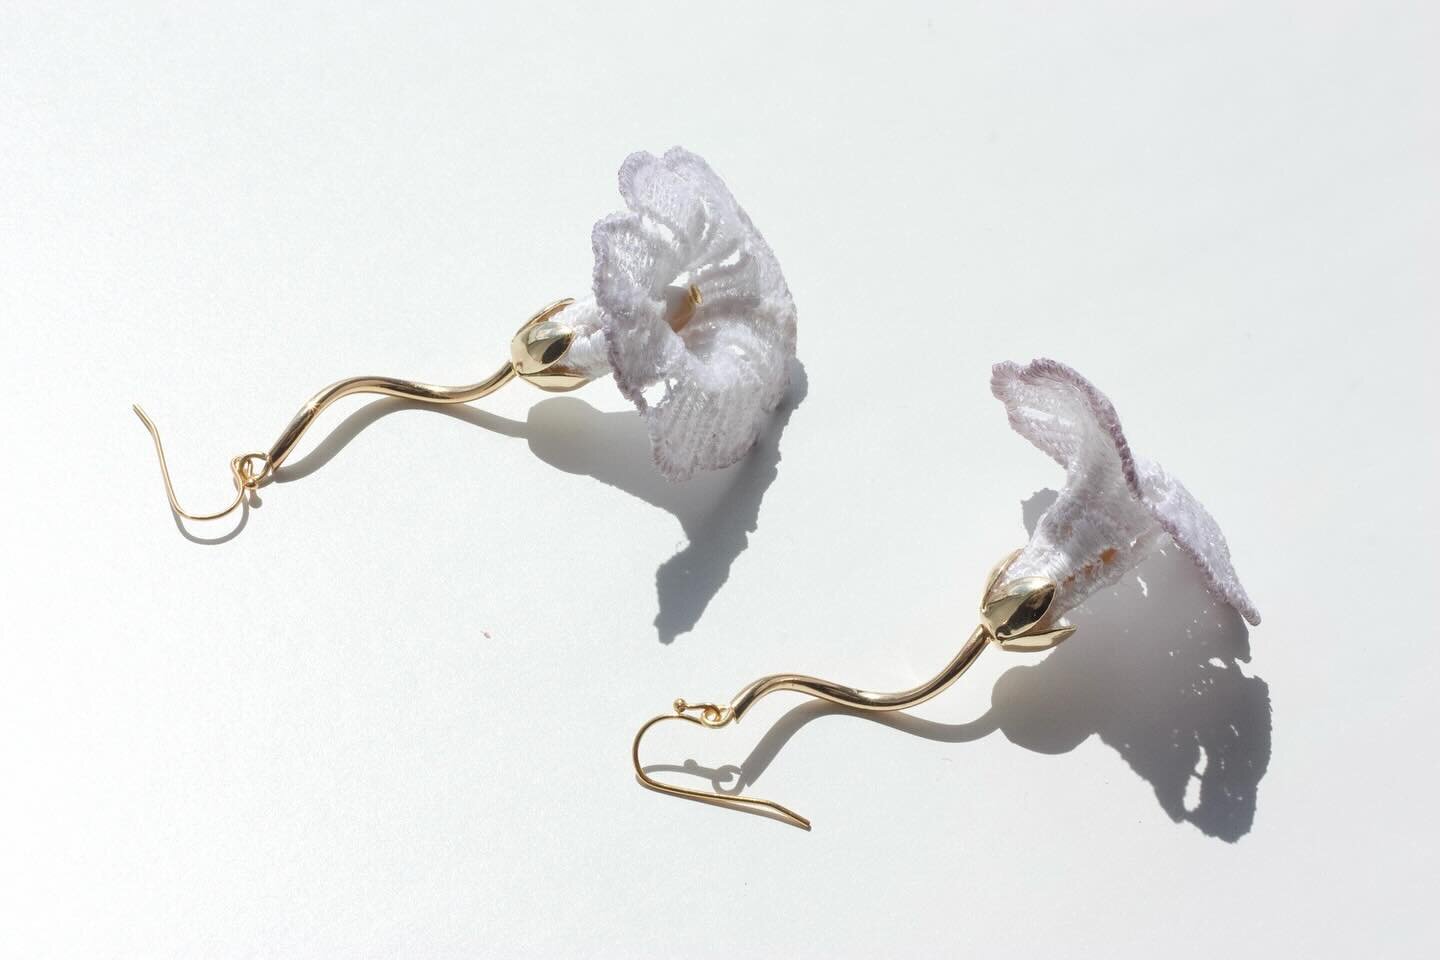 The Morning Glory earrings are perhaps the most literal representation of a flower. A flower that has too short of a lifespan to wear in our Natural Specimen earrings&hellip; the vintage lace option is far more durable 😉 

As I get back on top of th